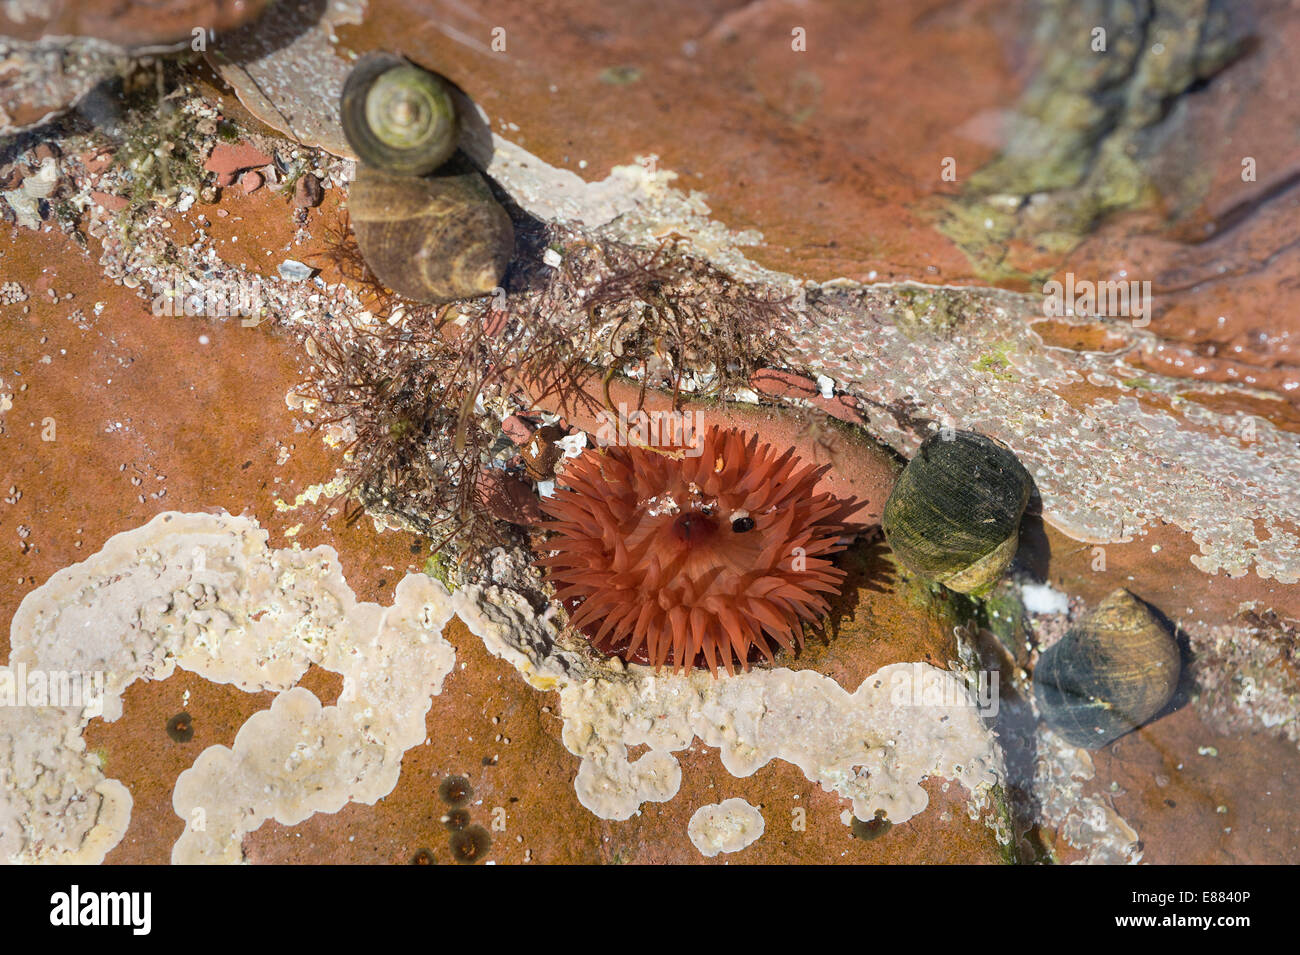 Beadlet anemone (Actinia equine) habit a rock pool at the low tide St. Brides Bay Pembrokshire National Park Wales UK Europe Stock Photo